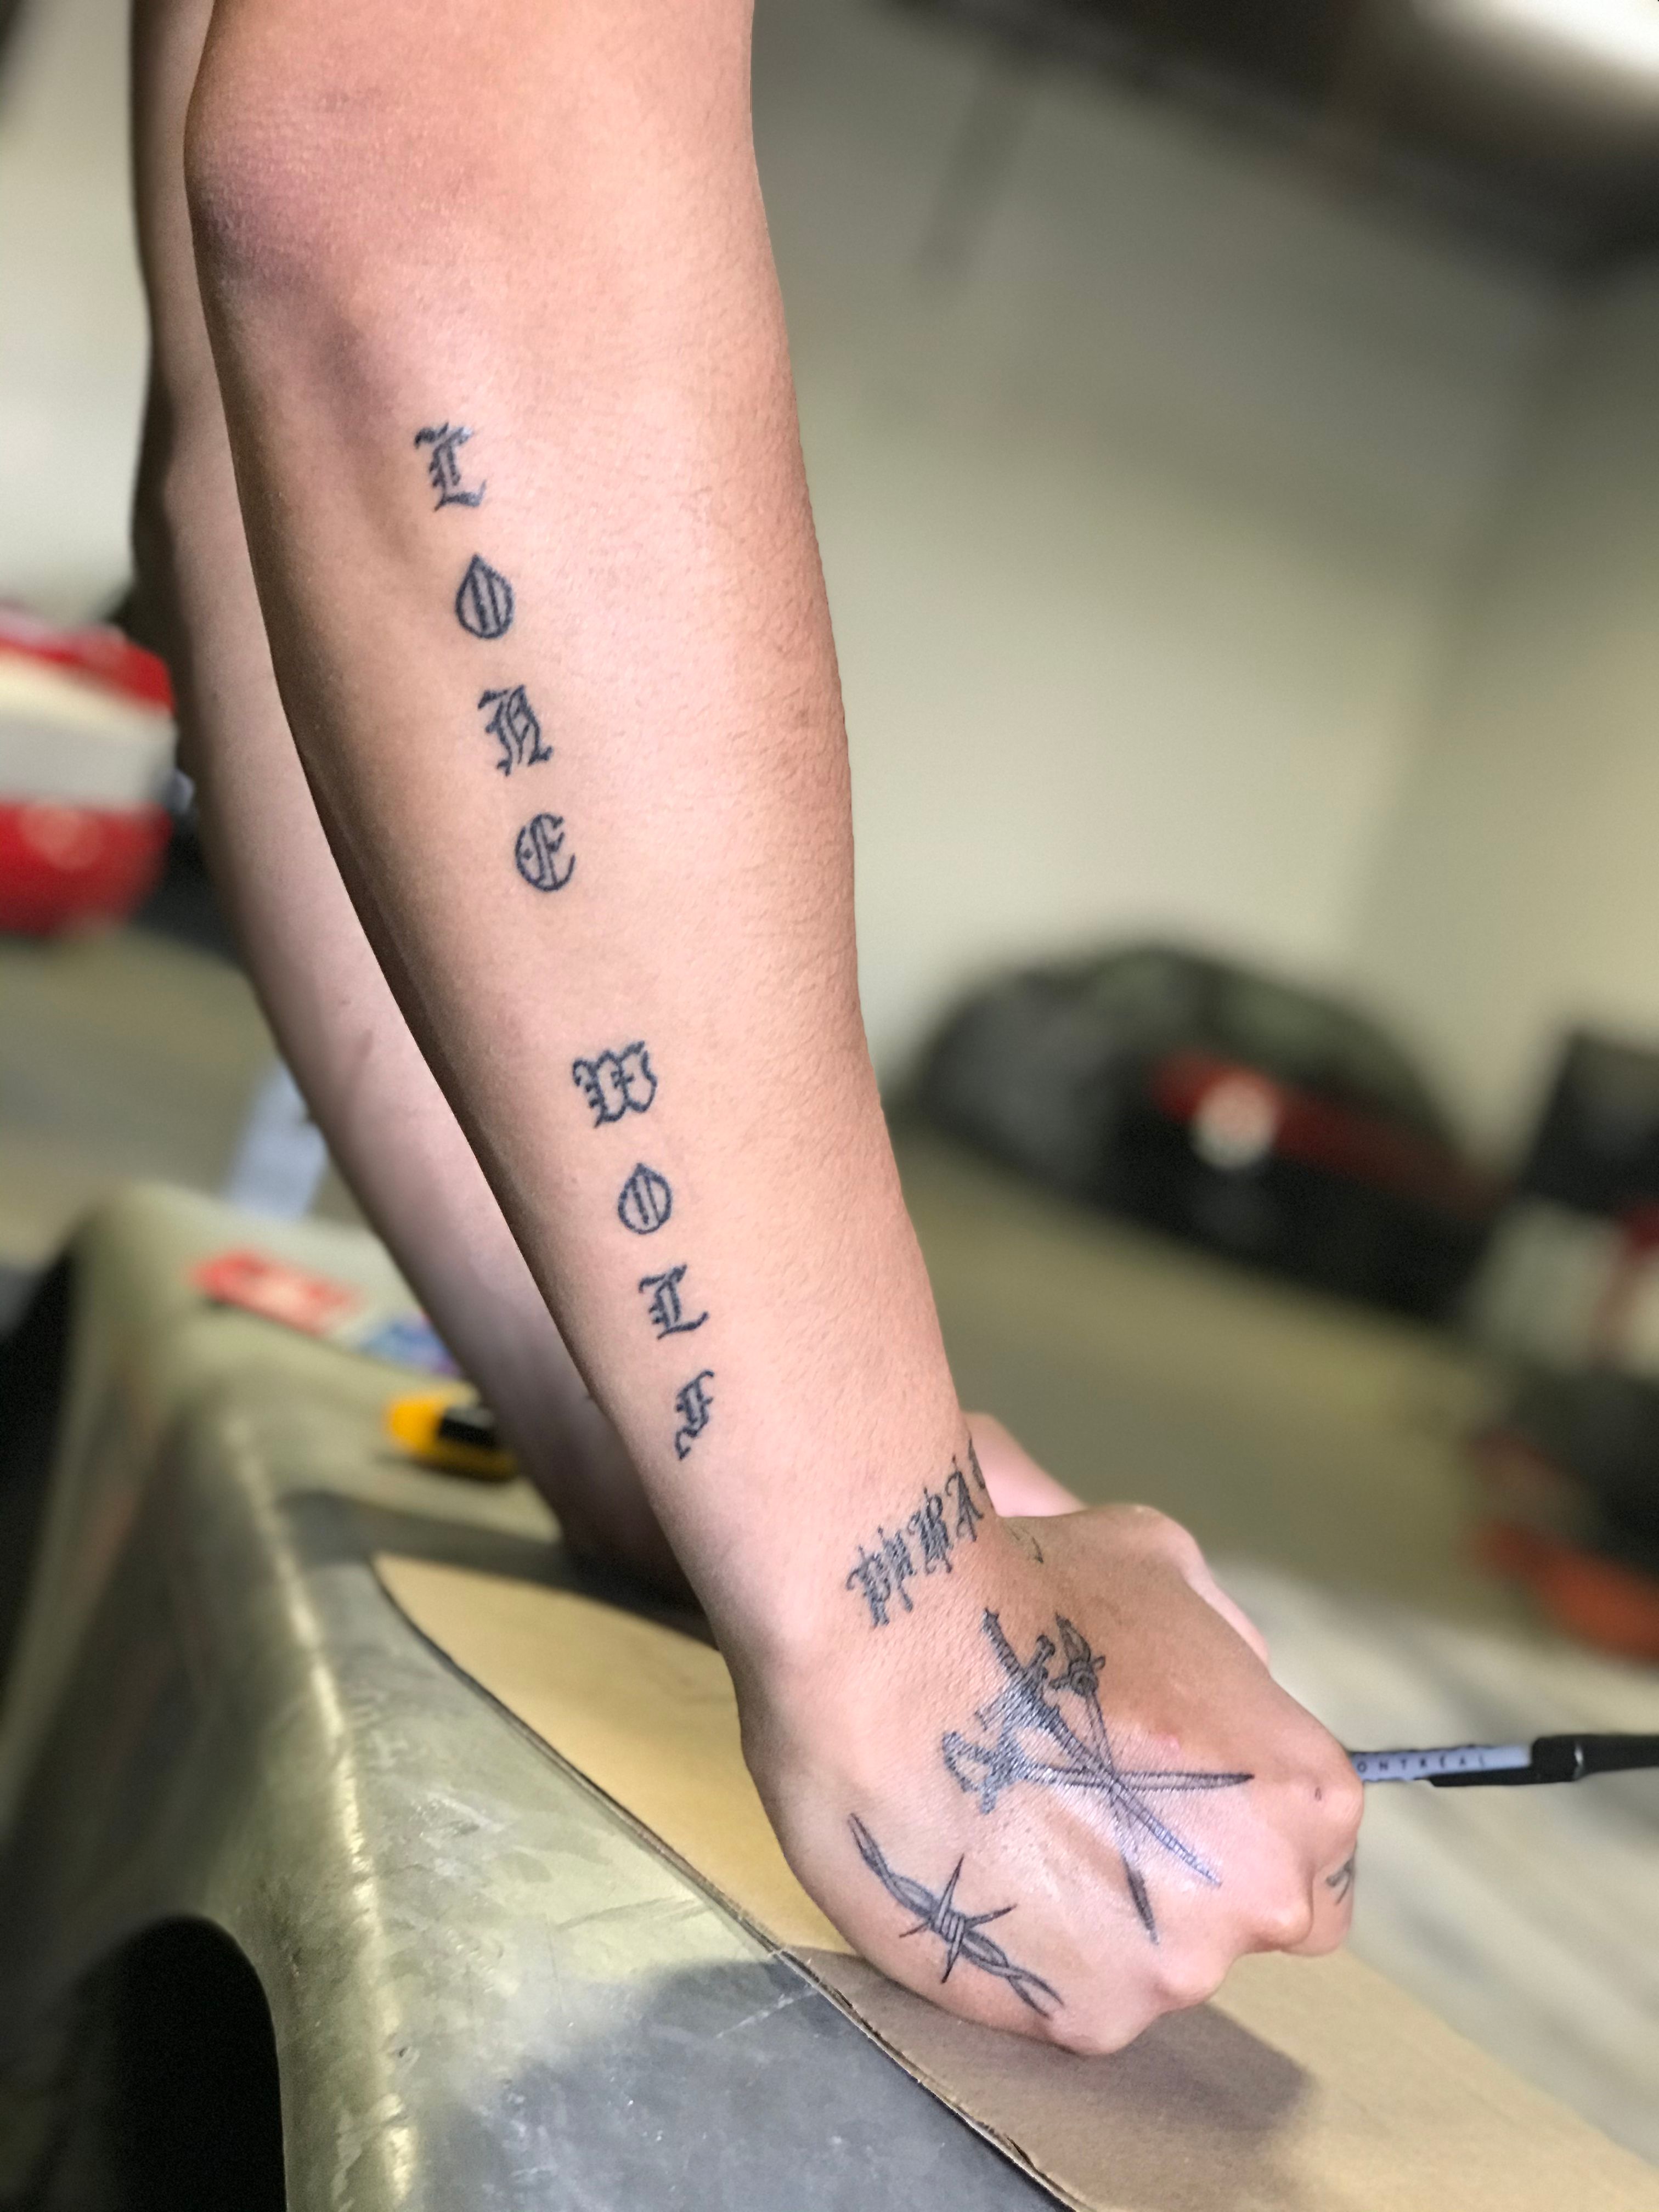 Korean Tattoo Symbols And Meanings Chinese tattoos | Chinese tattoo,  Chinese symbols, Symbols and meanings